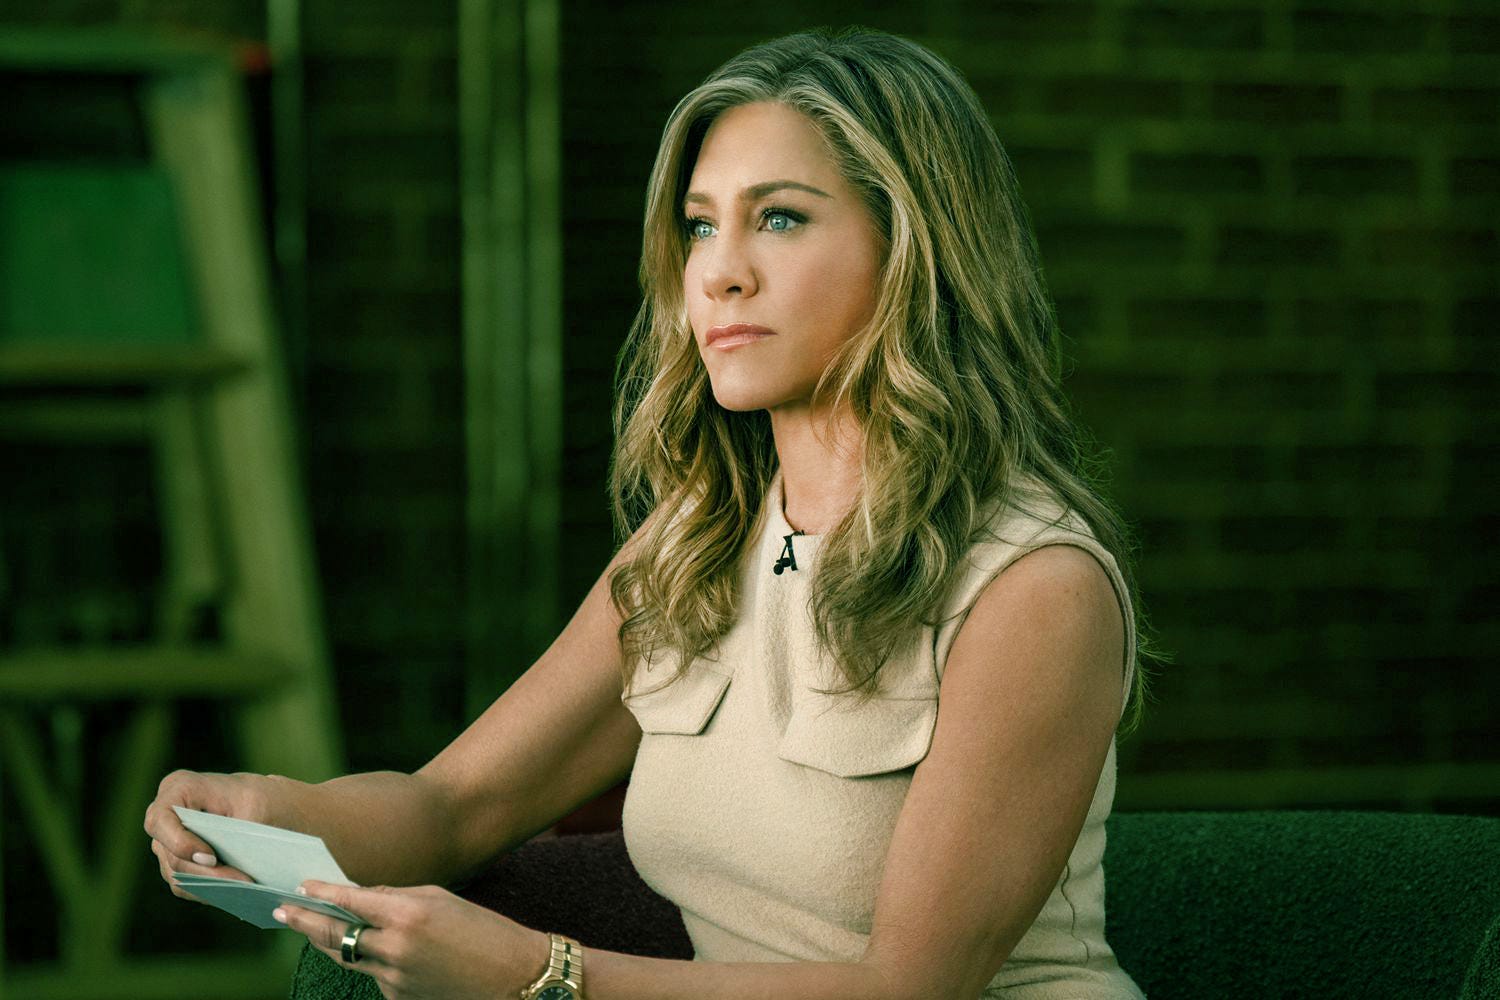 Jennifer Anniston in The Morning Show S3